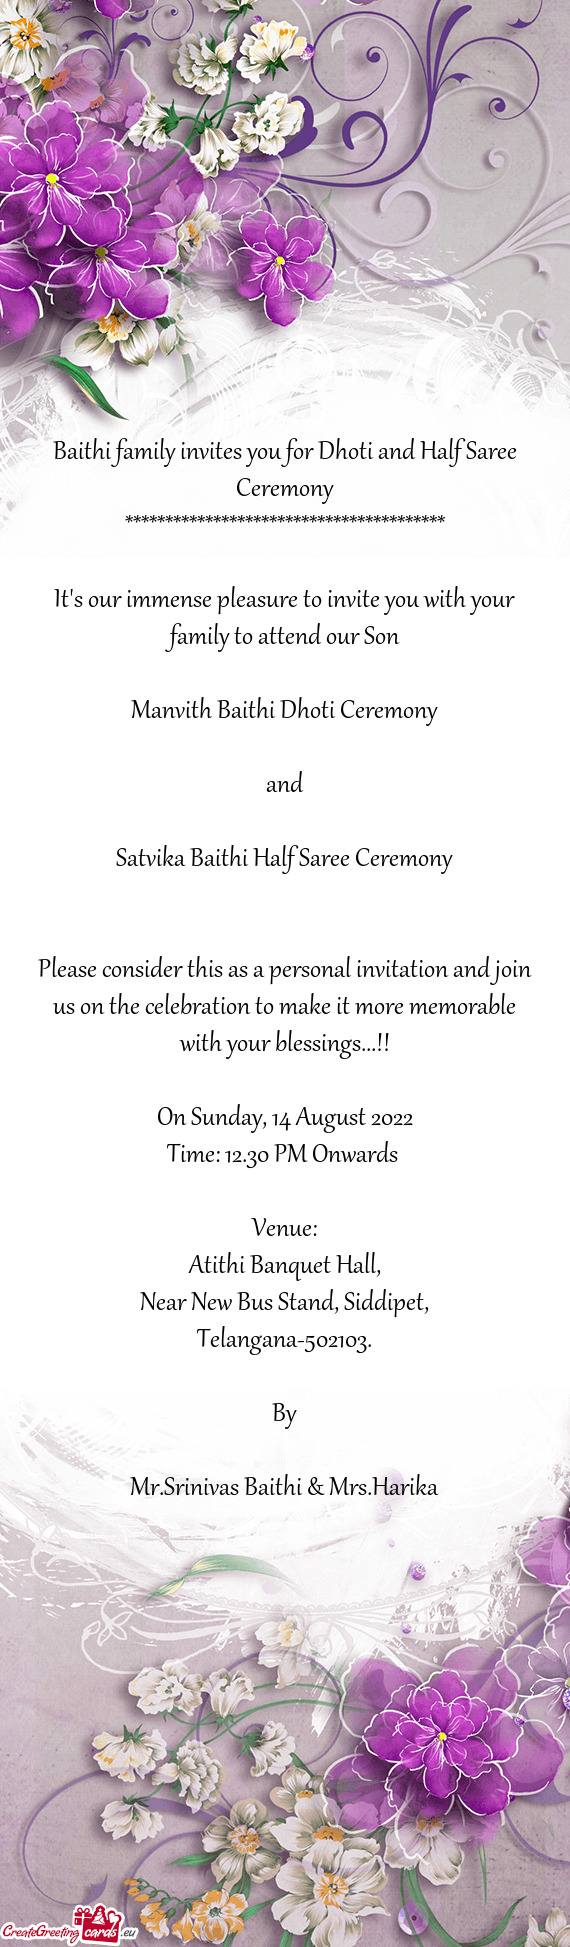 Baithi family invites you for Dhoti and Half Saree Ceremony